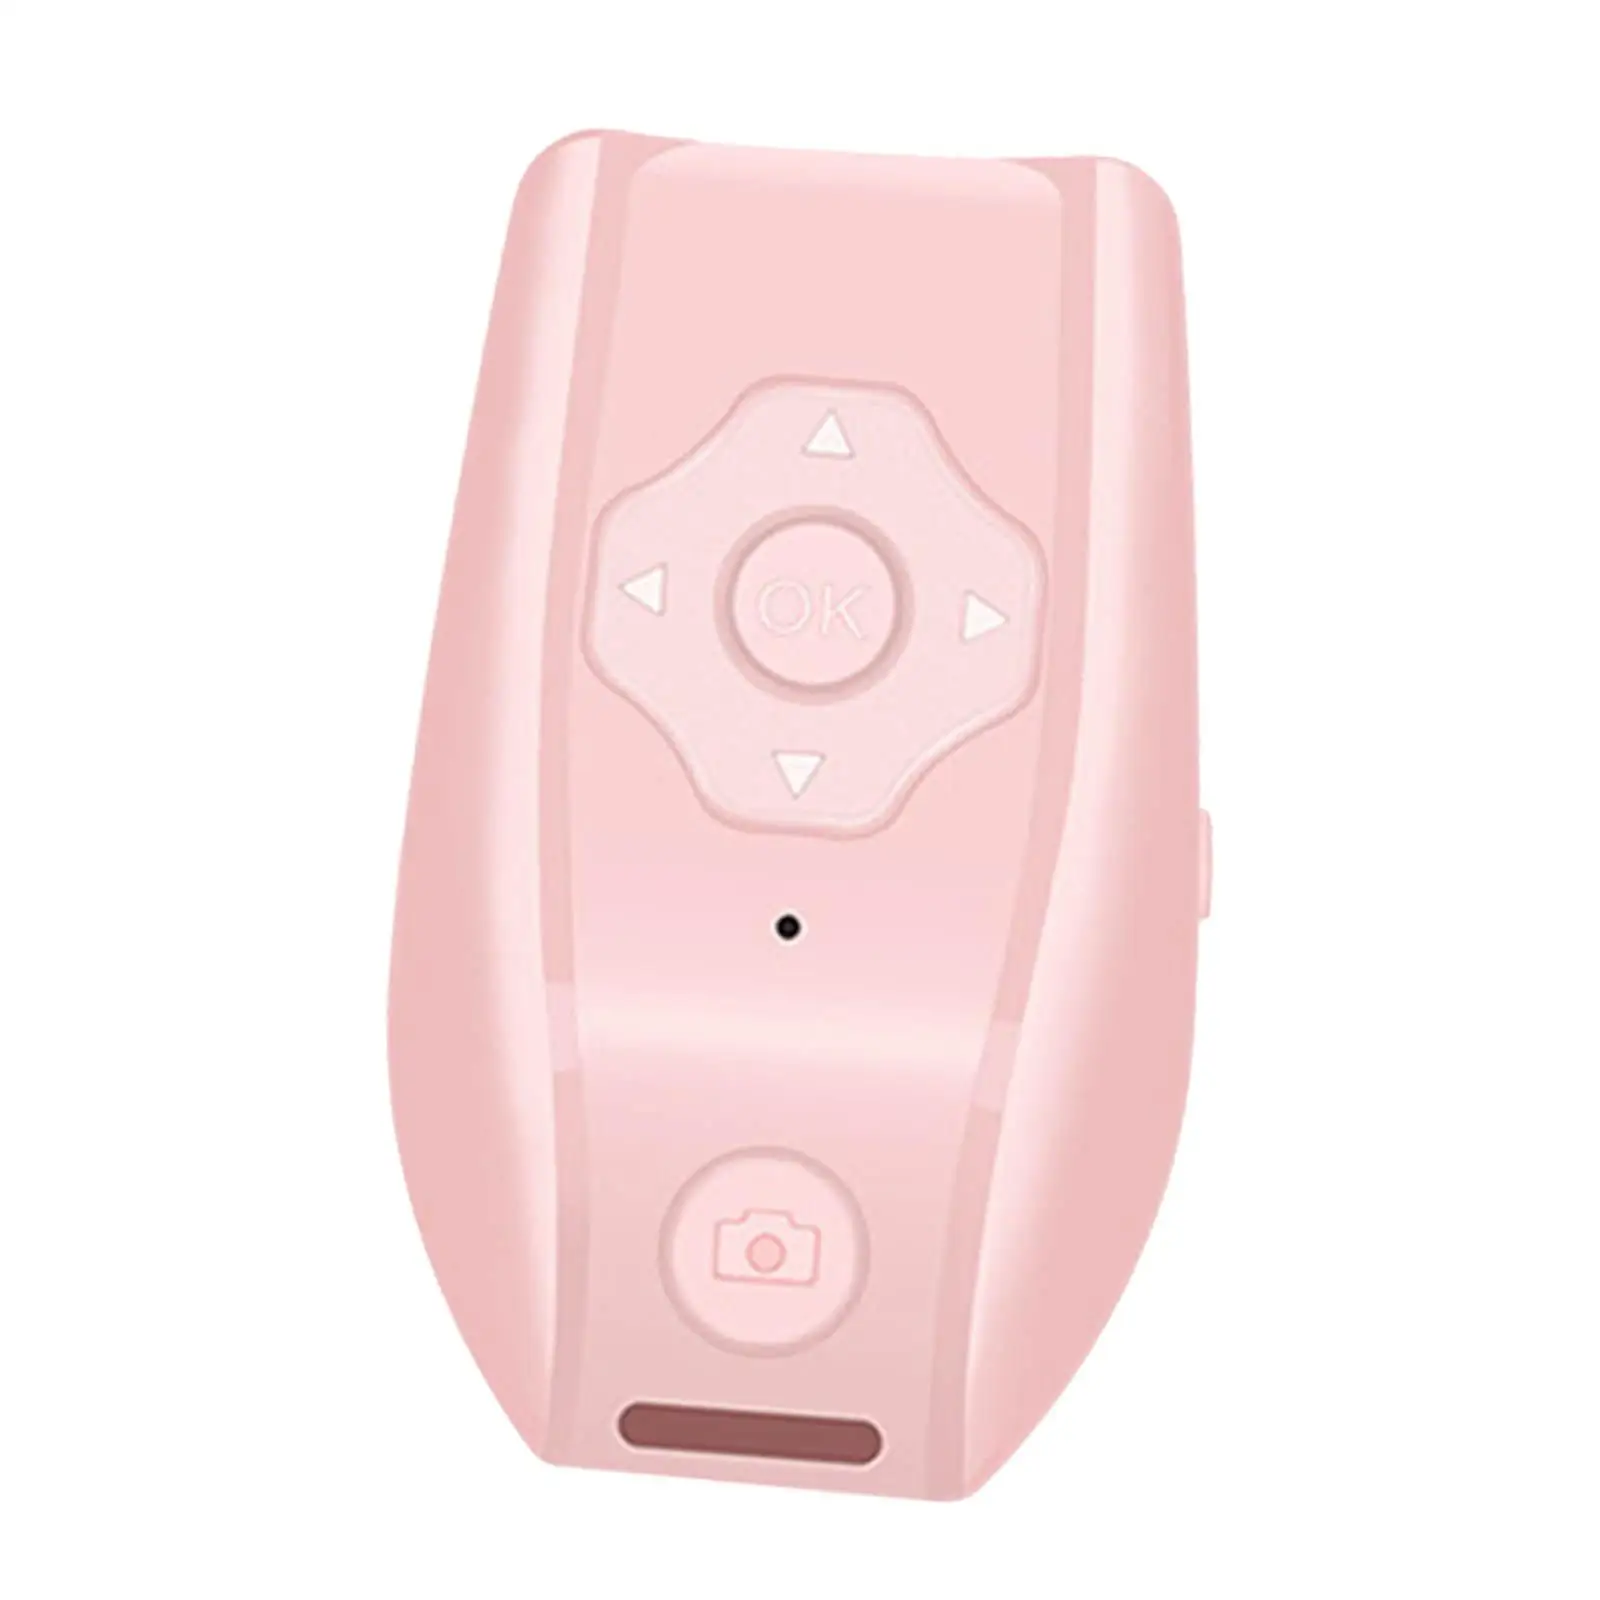 Bluetooth Phone Remote Controller Page Turner Selfie Button for Taking Photo